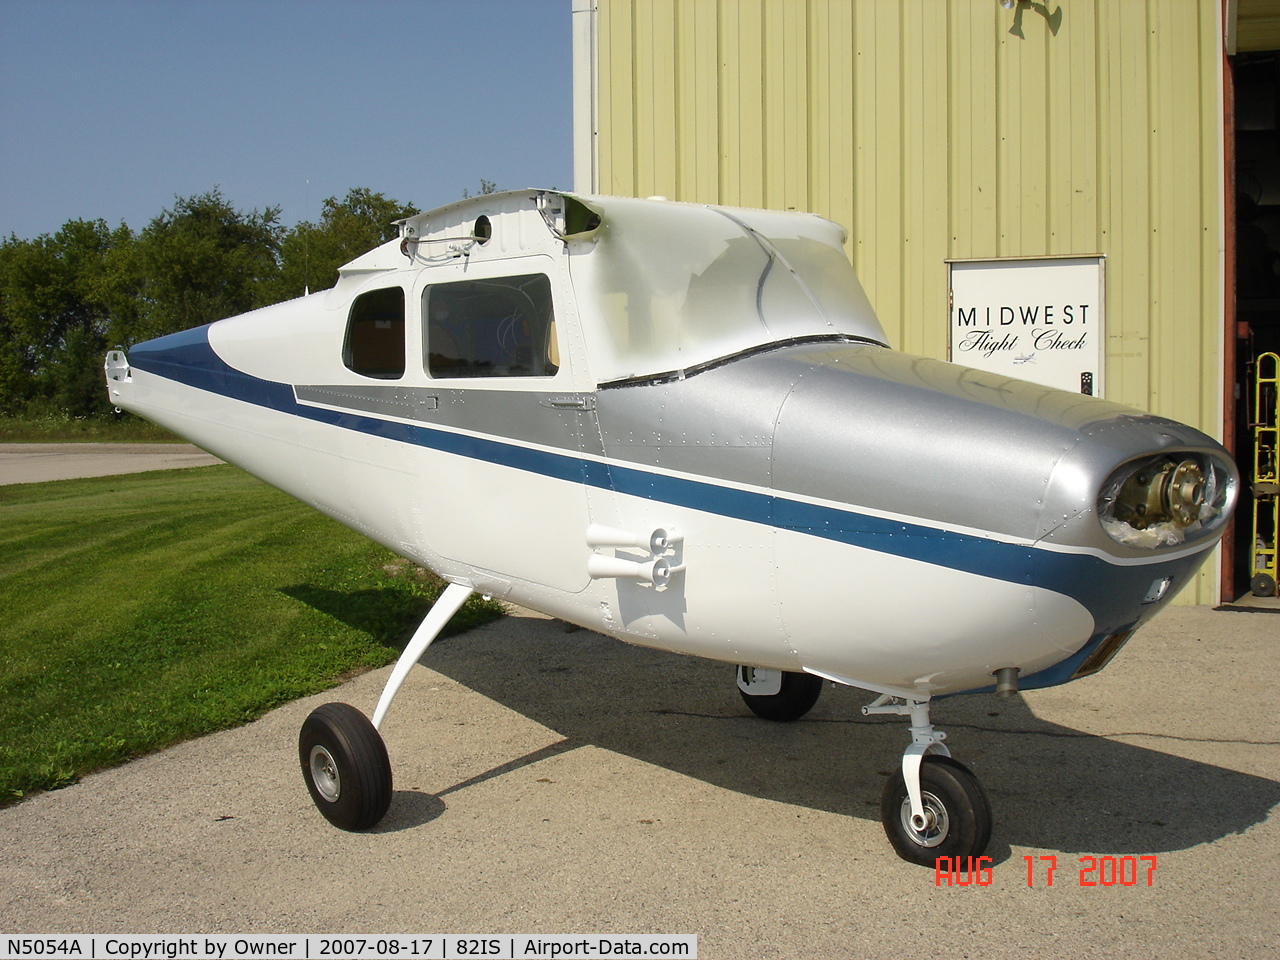 N5054A, 1955 Cessna 172 C/N 28054, I've Been working on it, on and off for 15 yrs (mostly off!) Working for a October flight...